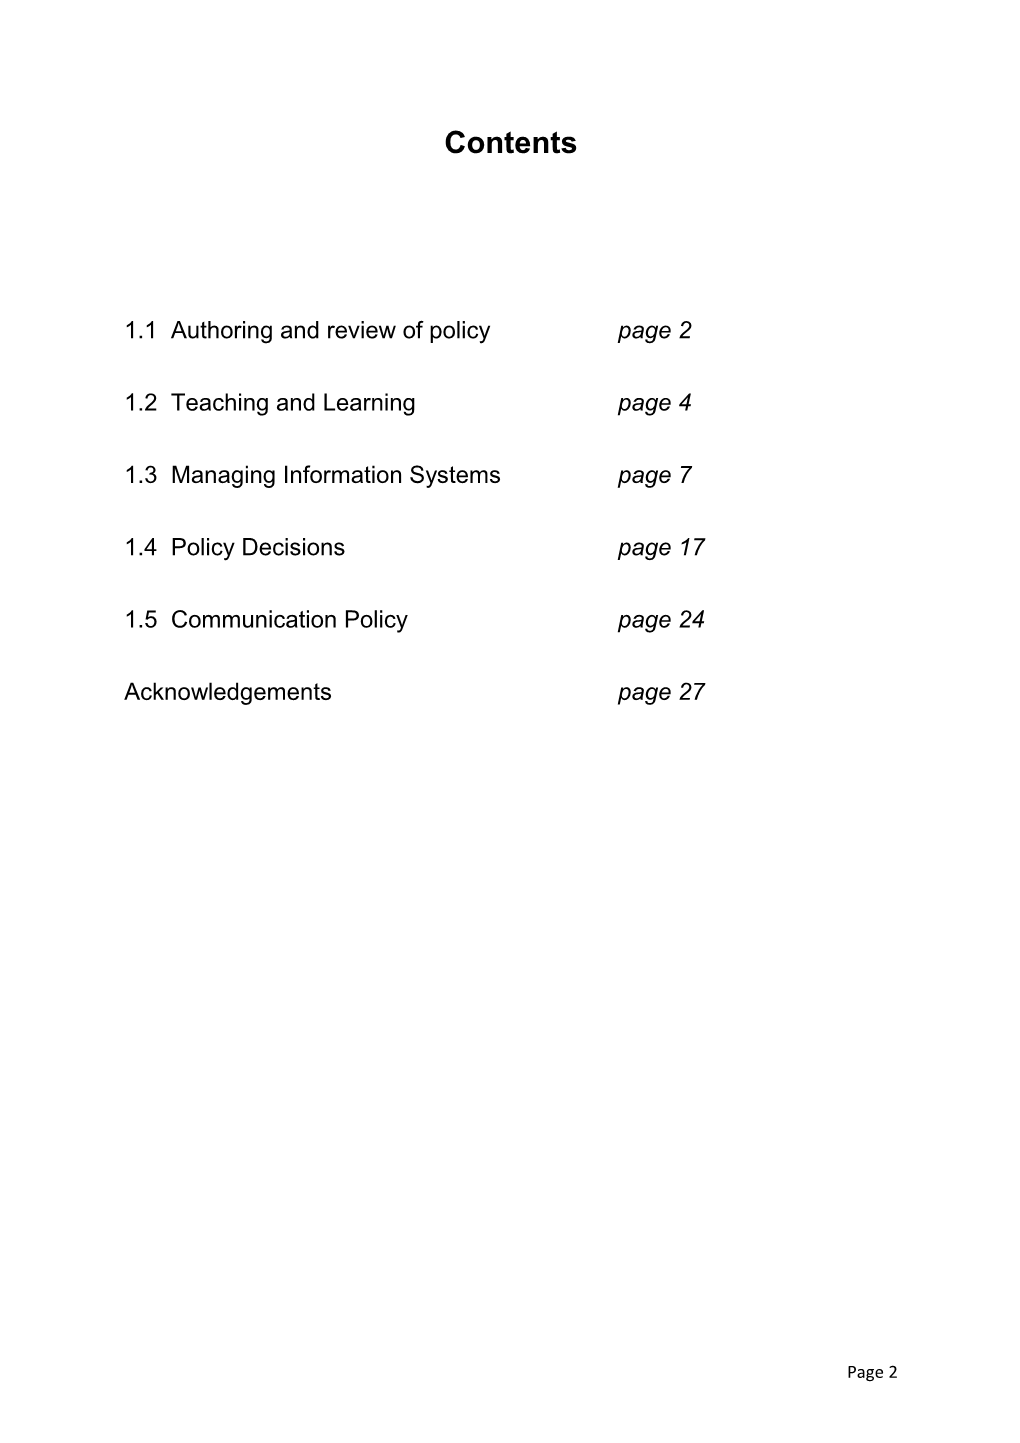 1.1 Authoring and Review of Policy Page 2